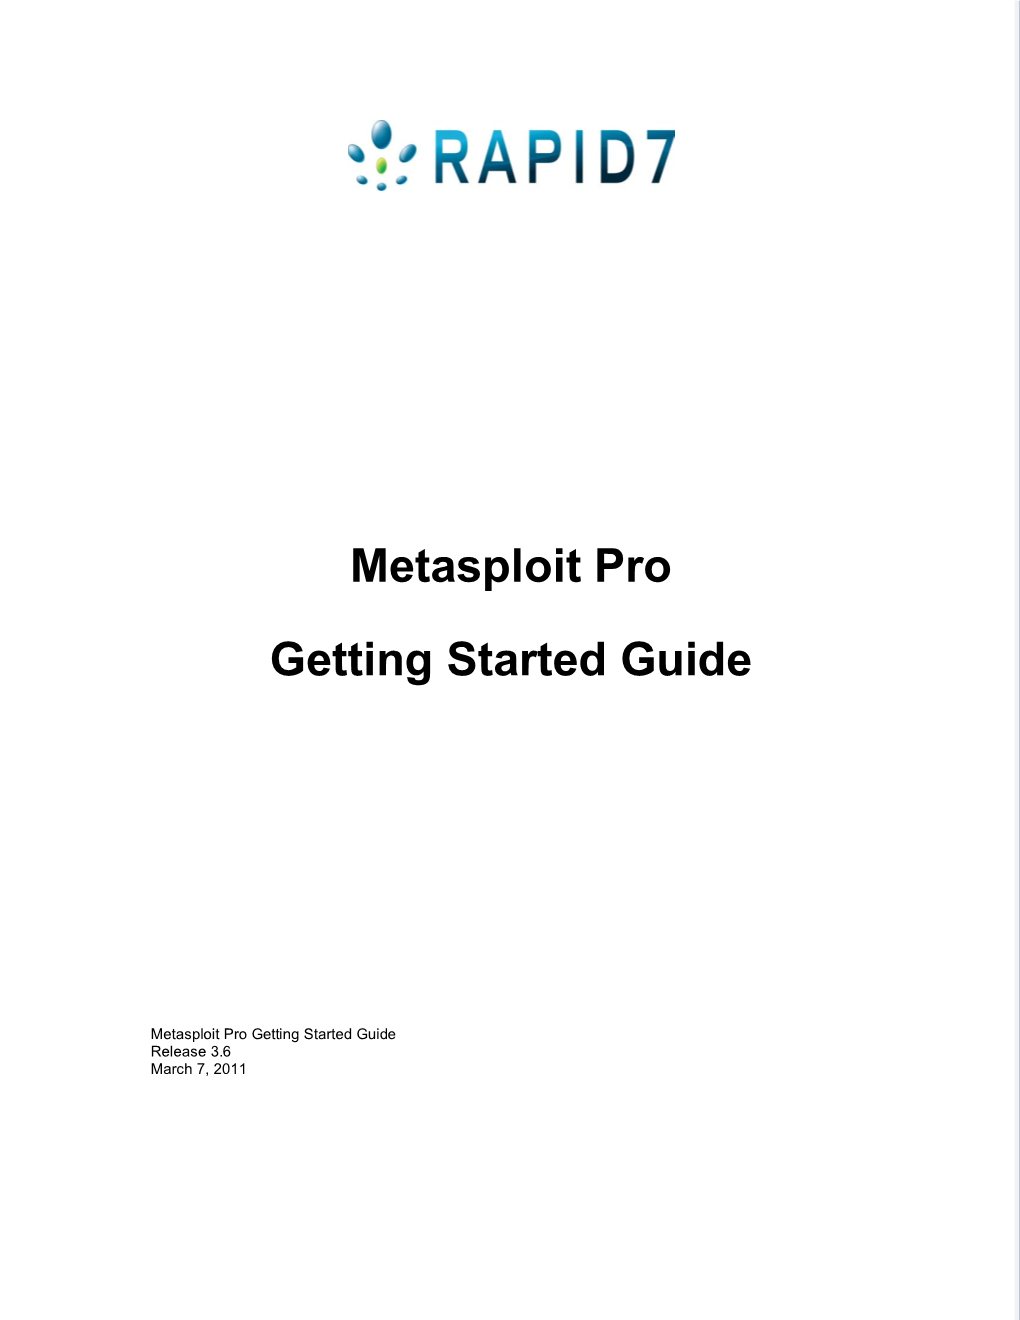 Metasploit Pro Getting Started Guide